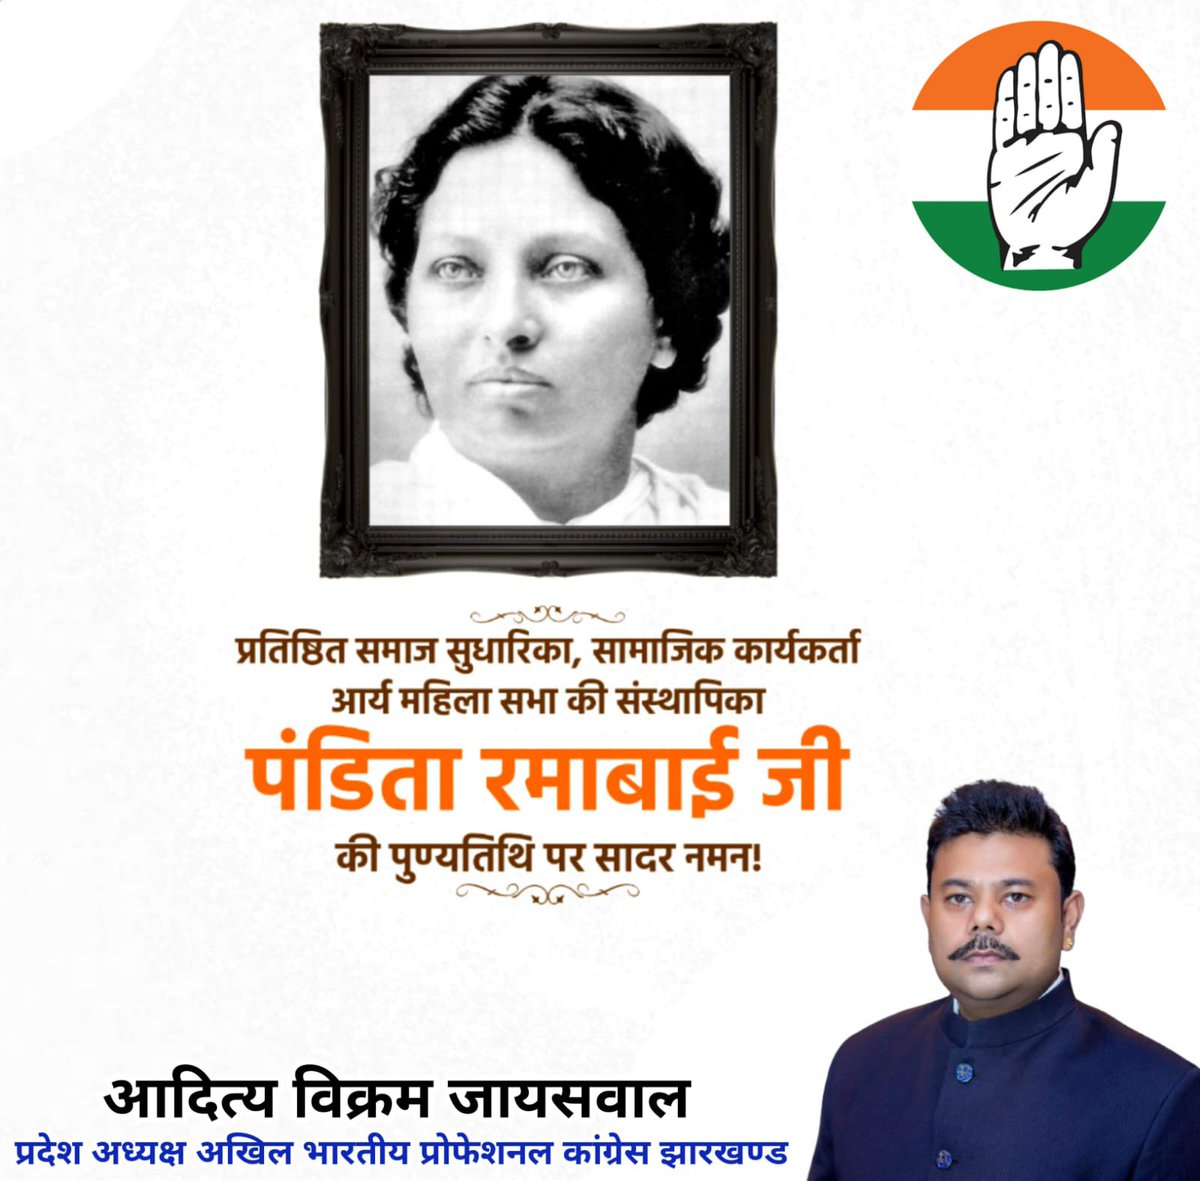 The founder of Arya Mahila Samaj (Arya Women's Society). the purpose of the society was to promote the cause of women's education and deliverance from the oppression of child marriage @AIPCJHR remembers and salutes  #panditaramabai ji #ramabai